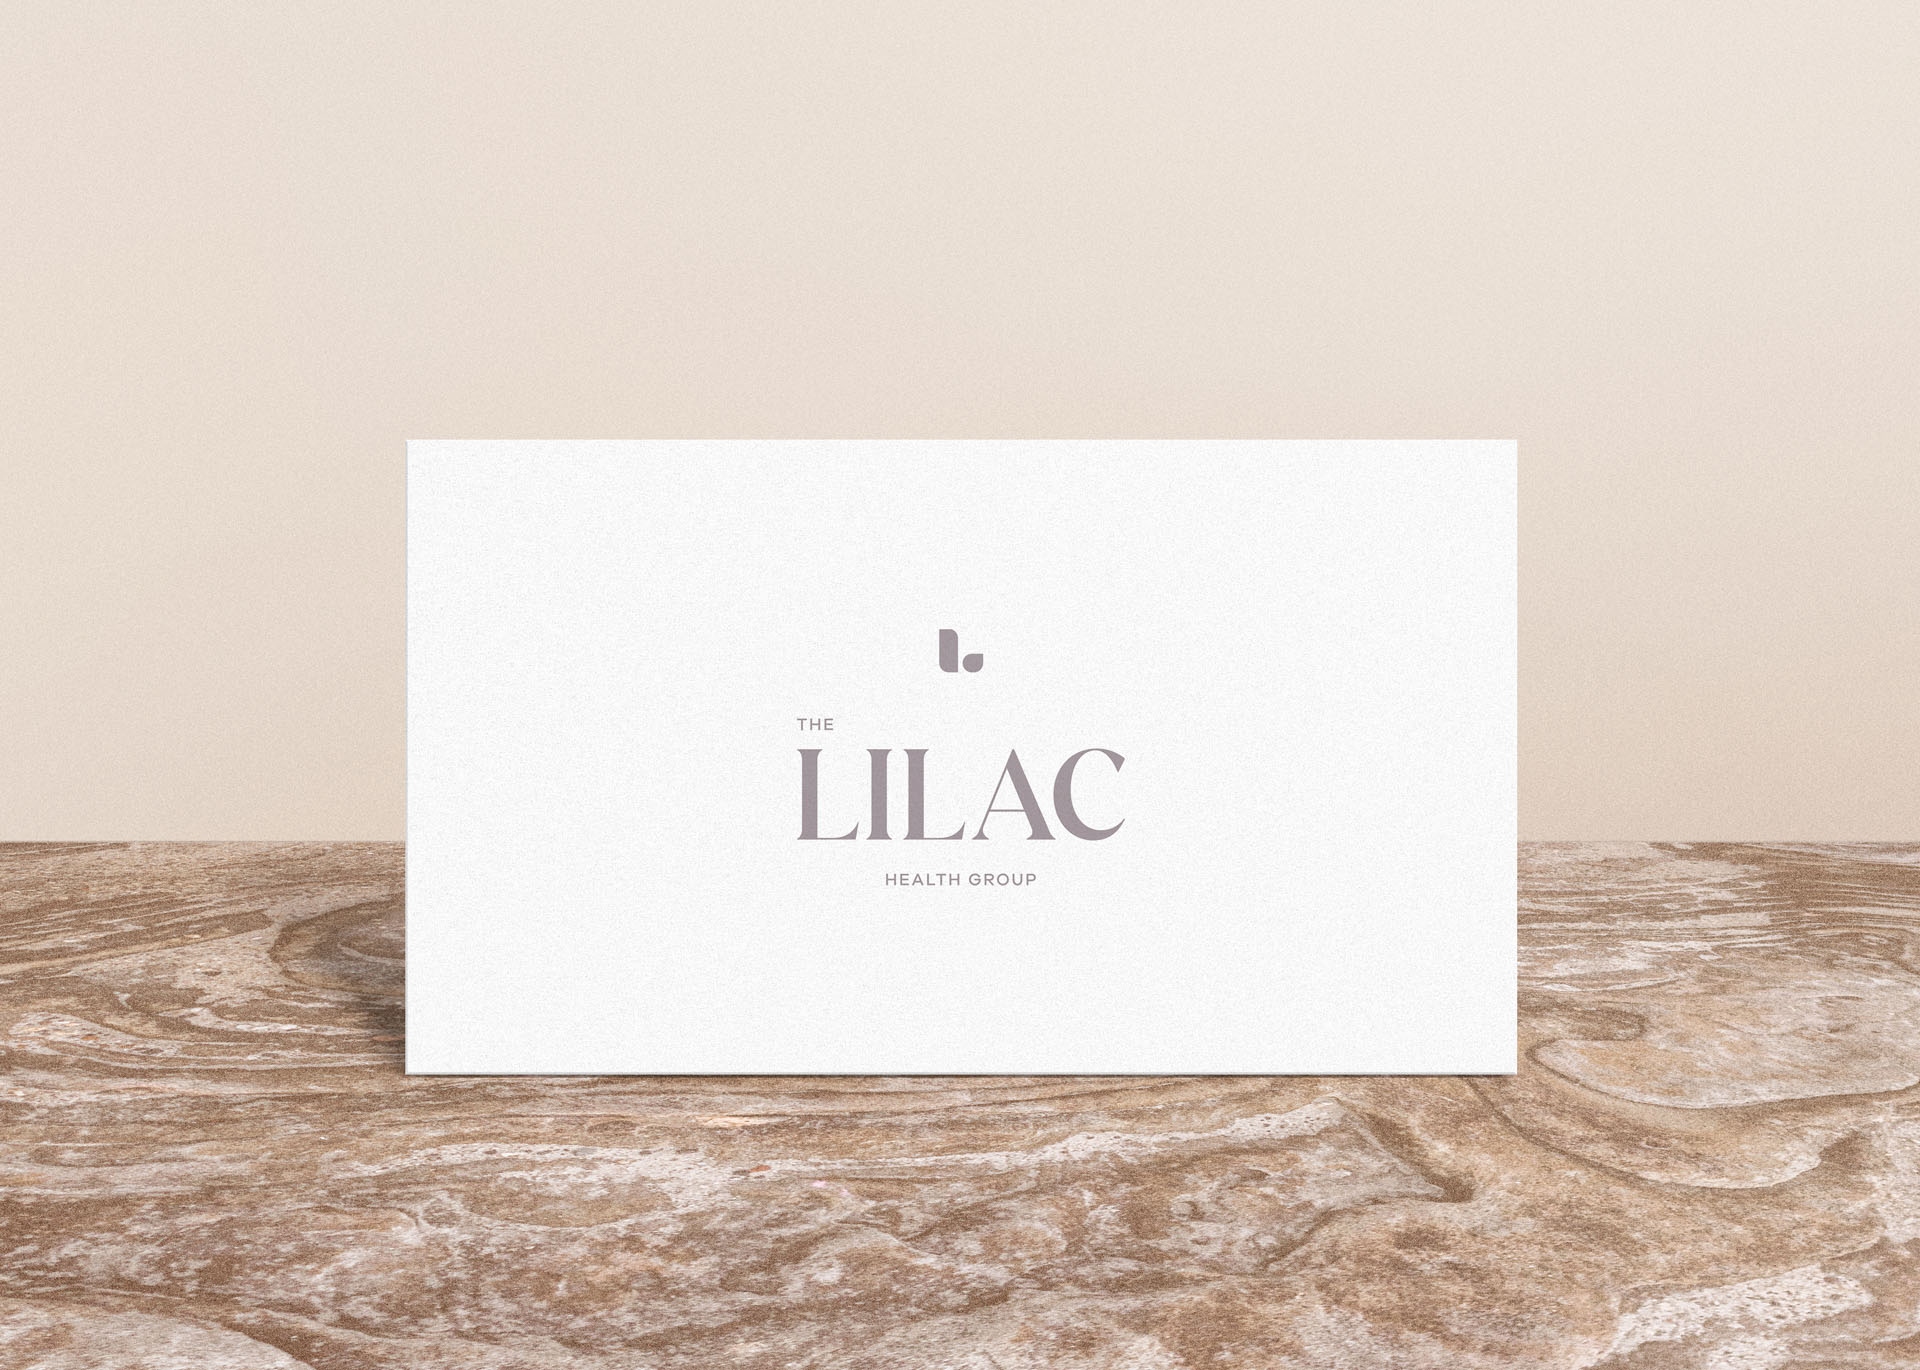 The Lilac Health Group